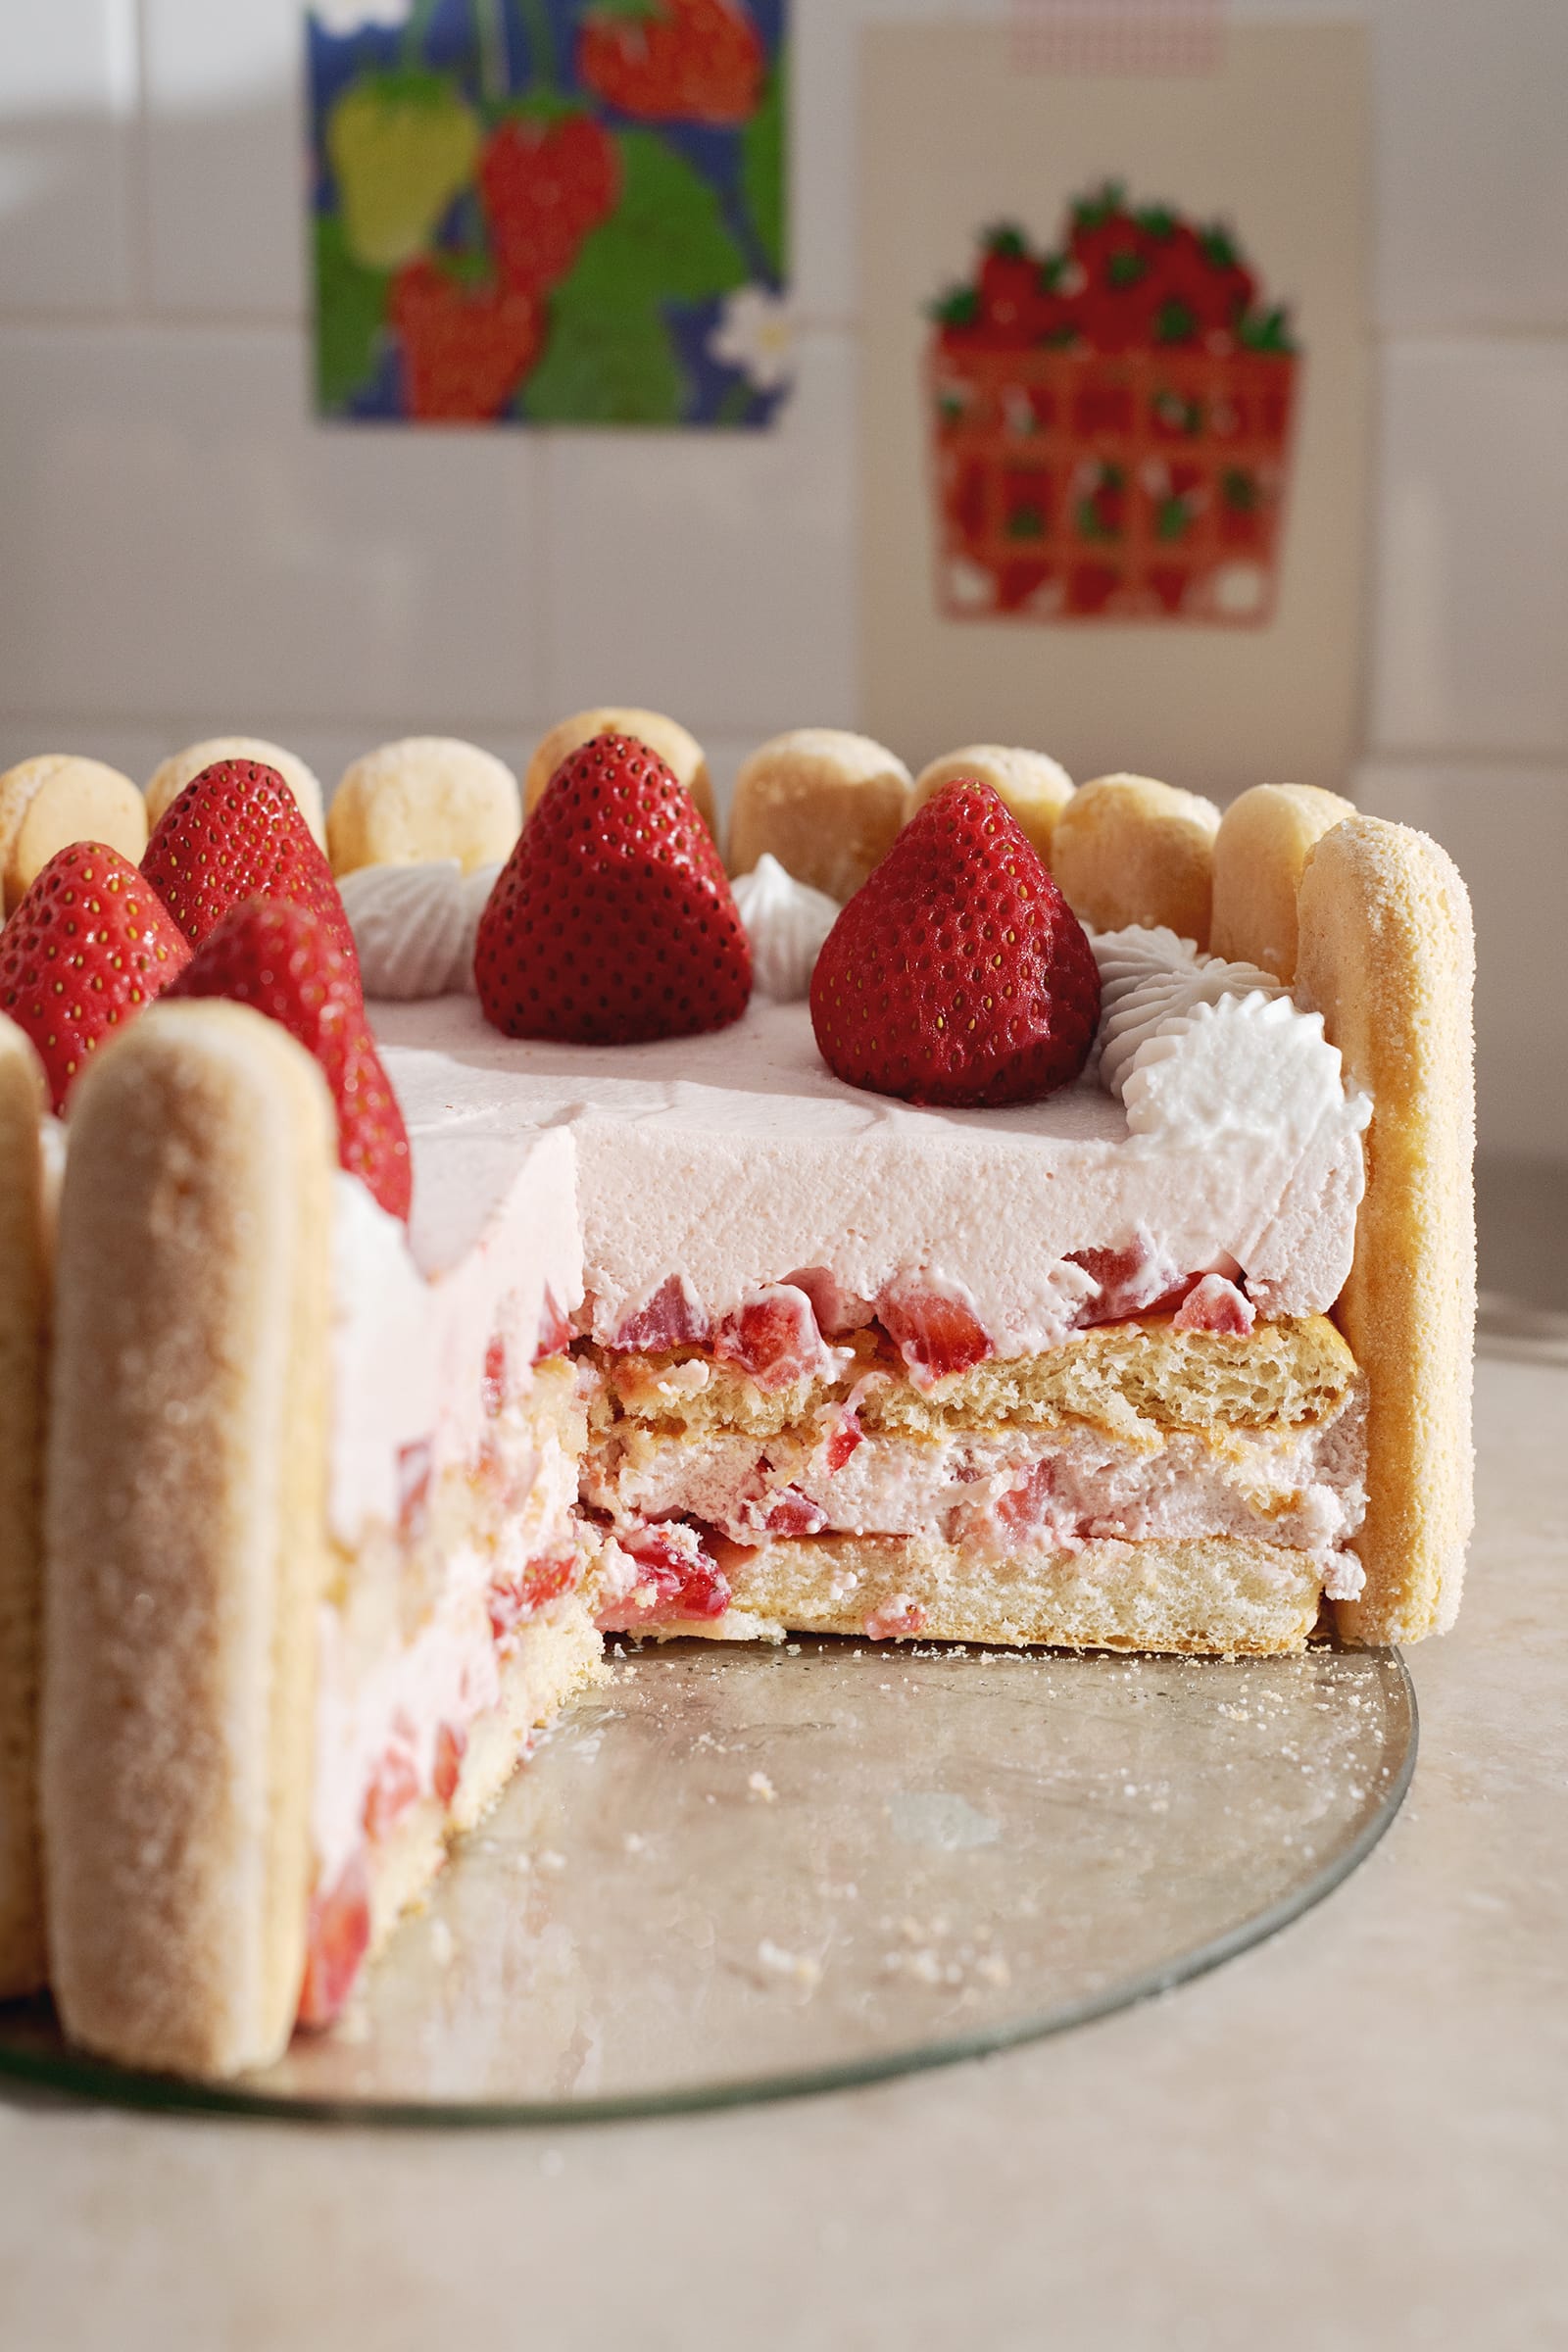 Cross section of a charlotte cake showing the layers of ladyfingers, strawberry mousse, and strawberries inside.